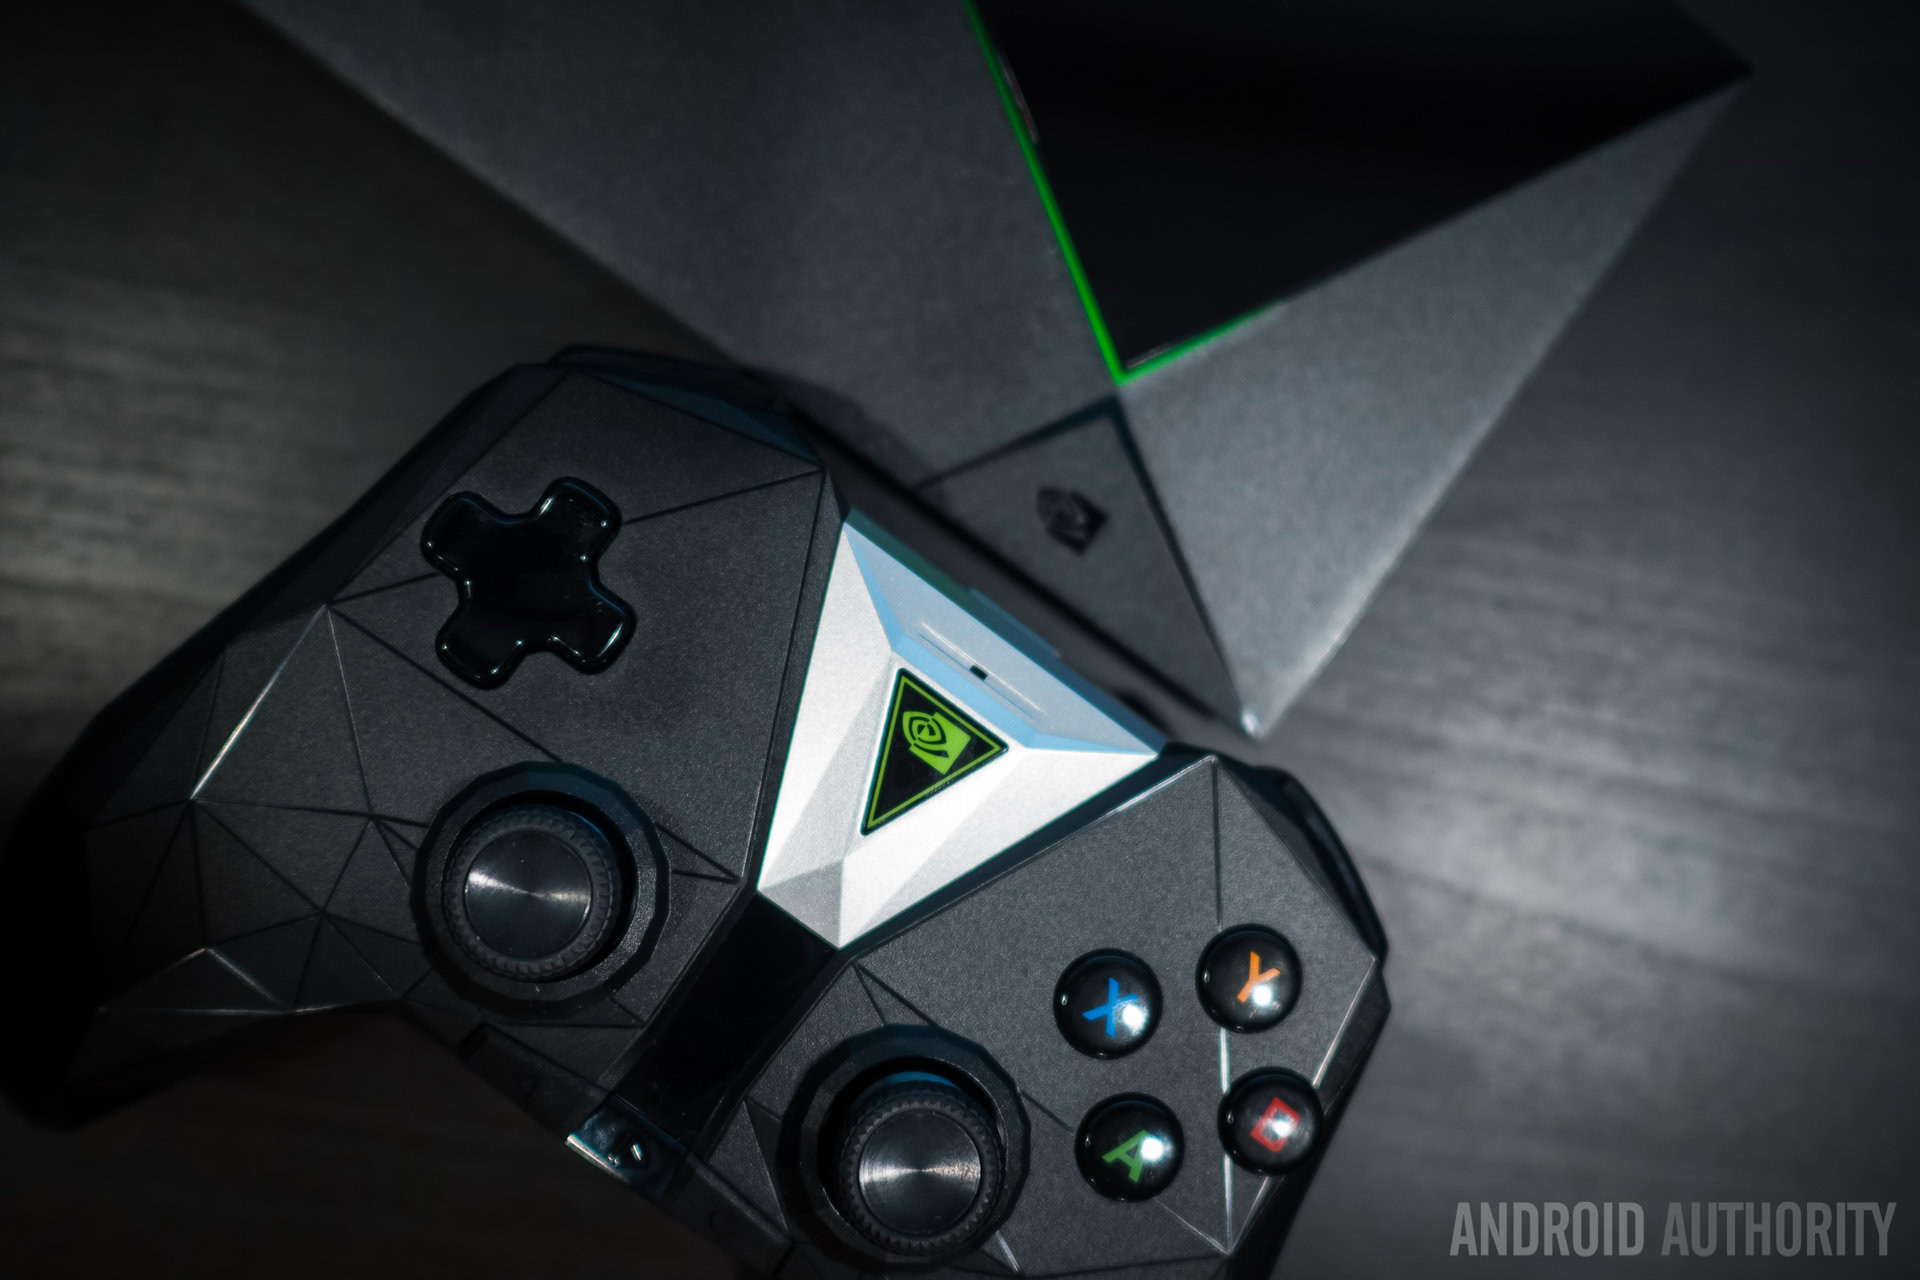 The Nvidia Shield TV and controller.